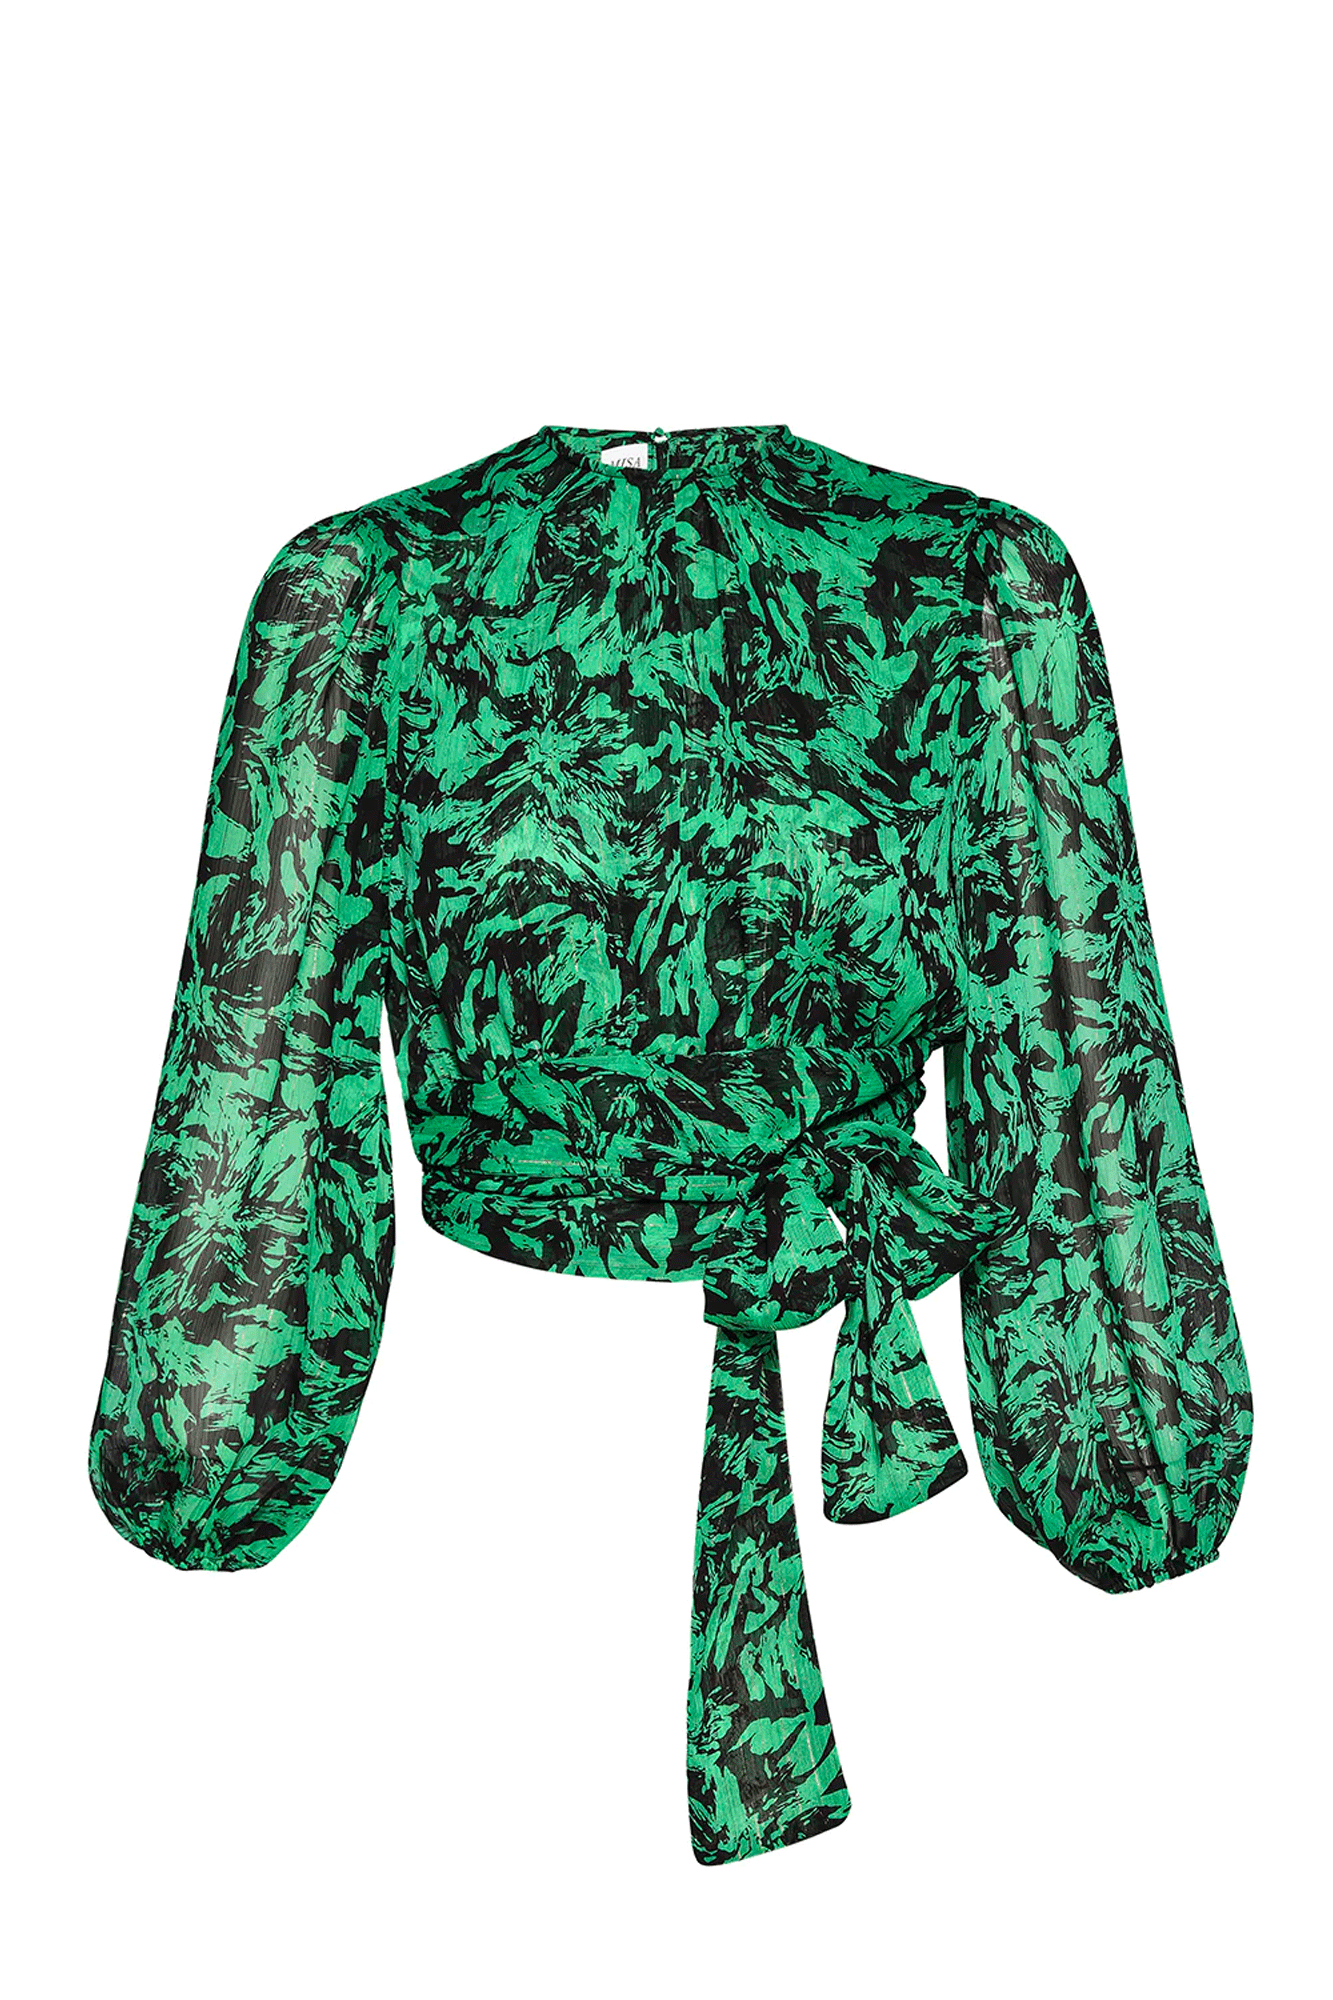 Make a statement in the eye-catching Beatriz Top from Misa. Cut from beautiful emerald and black abstract printed chiffon with golden lurex pinstripes, the top features a high neckline, blouson semi-sheer sleeves with elasticated cuffs, an open keyhole back, and a banded waist that can be tied in the back or wrapped to tie in the front. Completely double-lined in the bodice, this stunning top provides an elegant, comfortable look for any occasion.